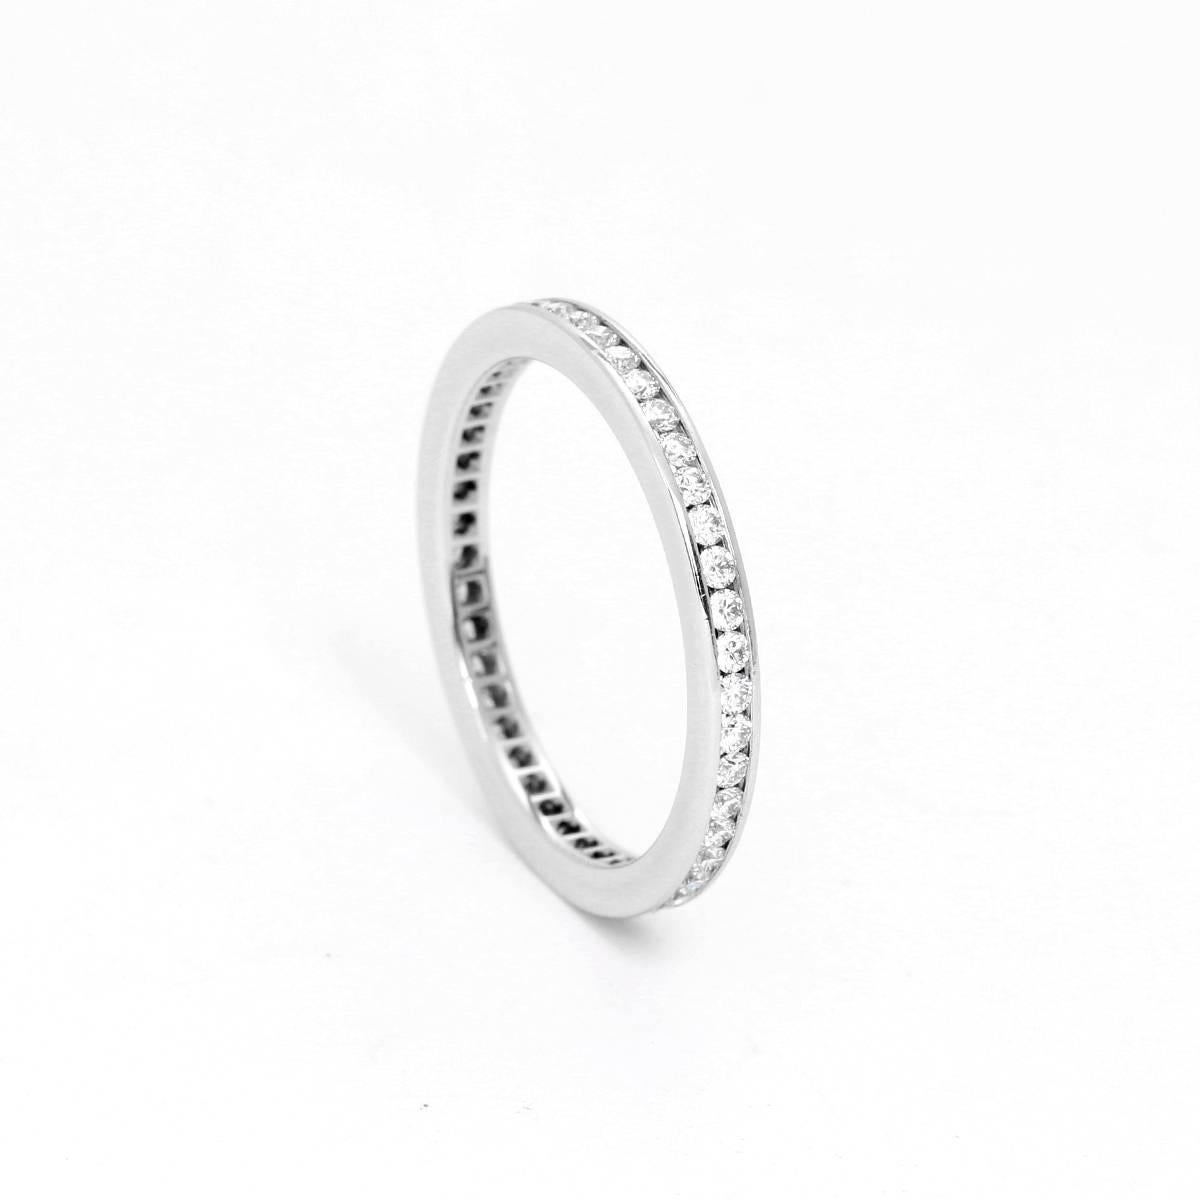 Cartier Platinum  1.9mm Diamond Band Size 6 1/4 - . Pre-owned with Cartier box and papers .285 cts. Total weight 2.5 grams.